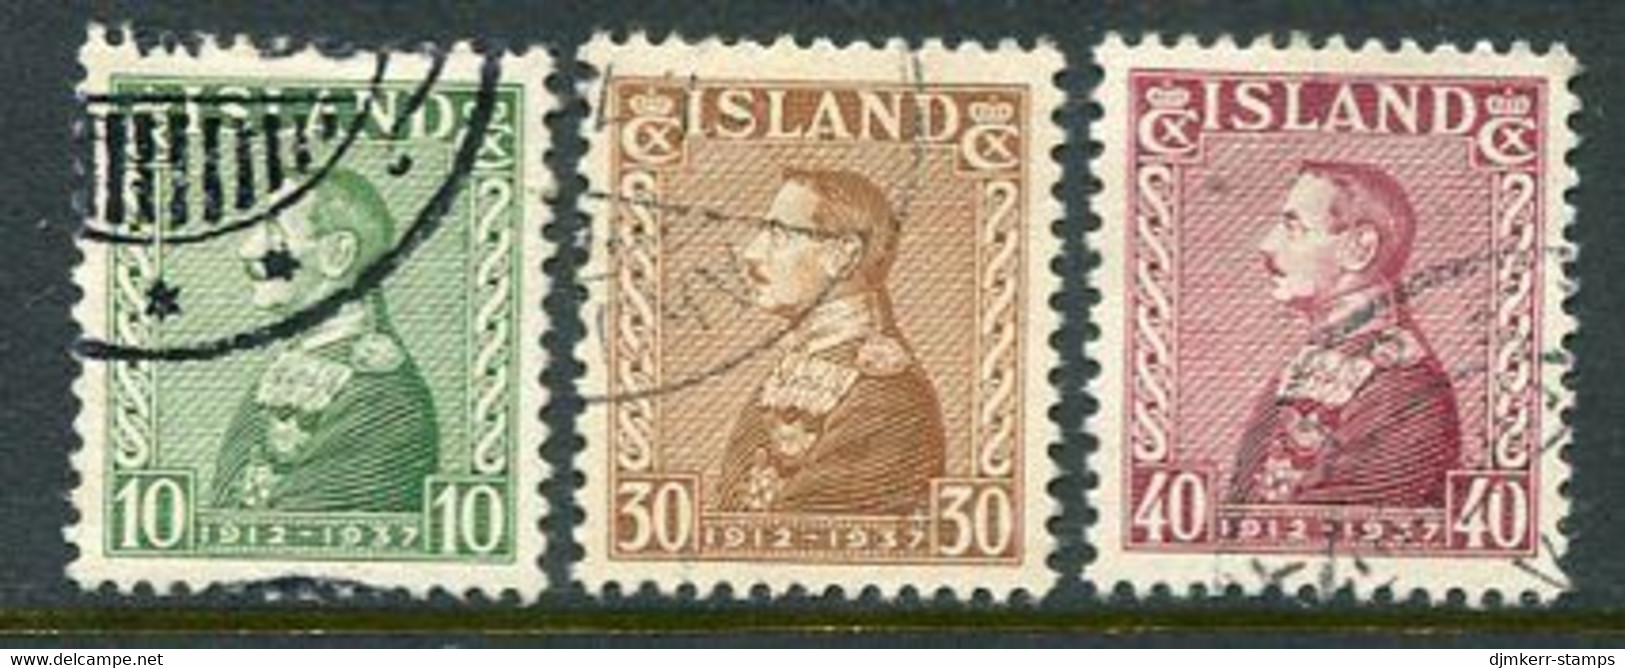 ICELAND  1937 25th Anniversary Of Regency Used.  Michel 187-189 - Oblitérés